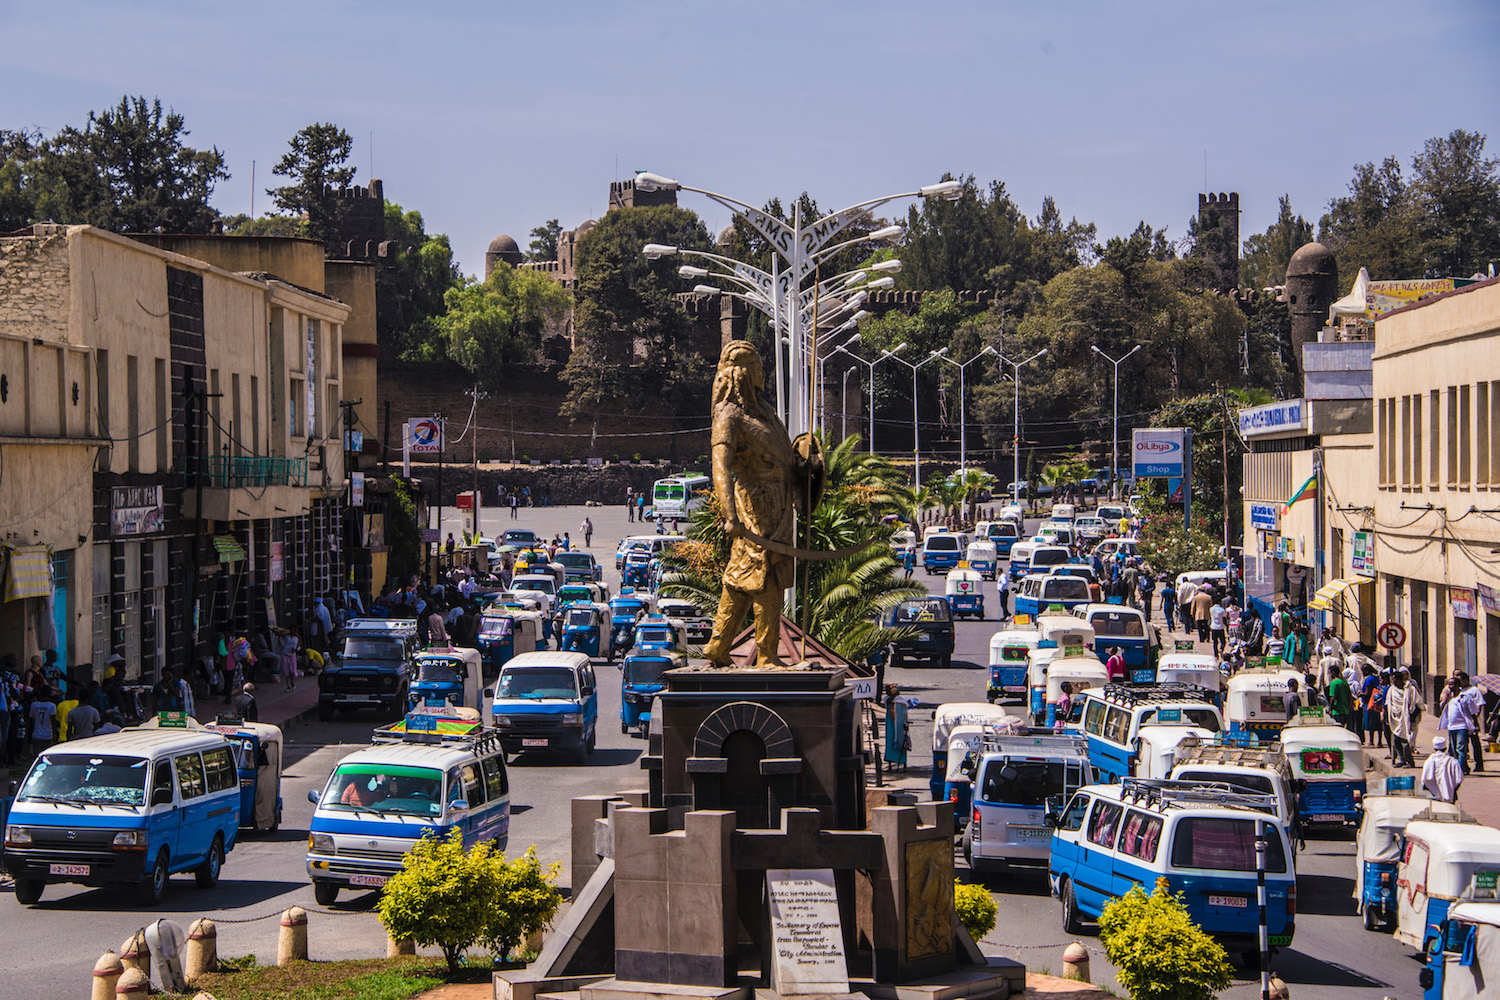 The Most Interesting City in Ethiopia (Hint: It’s Not Lalibela)